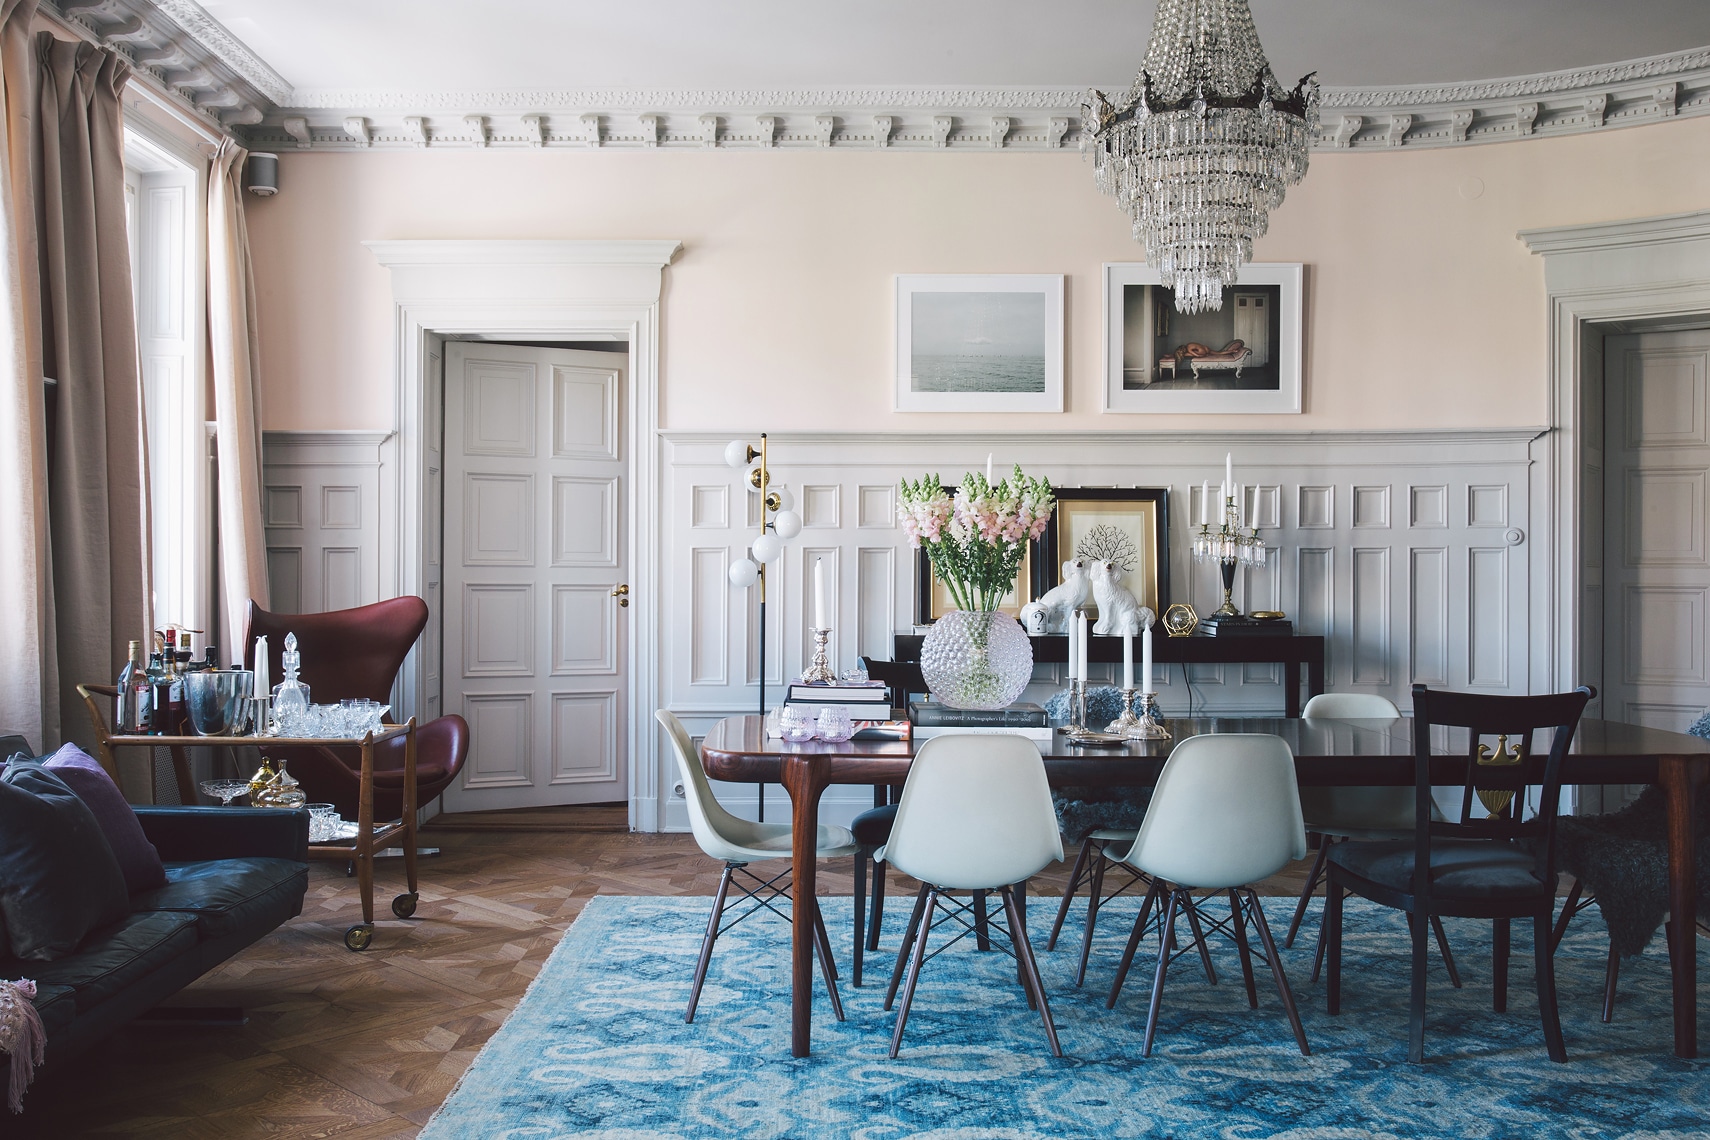 romantic dining room in pale peach and blue with gorgeous wood floors and dramatic chandelier | via coco kelley